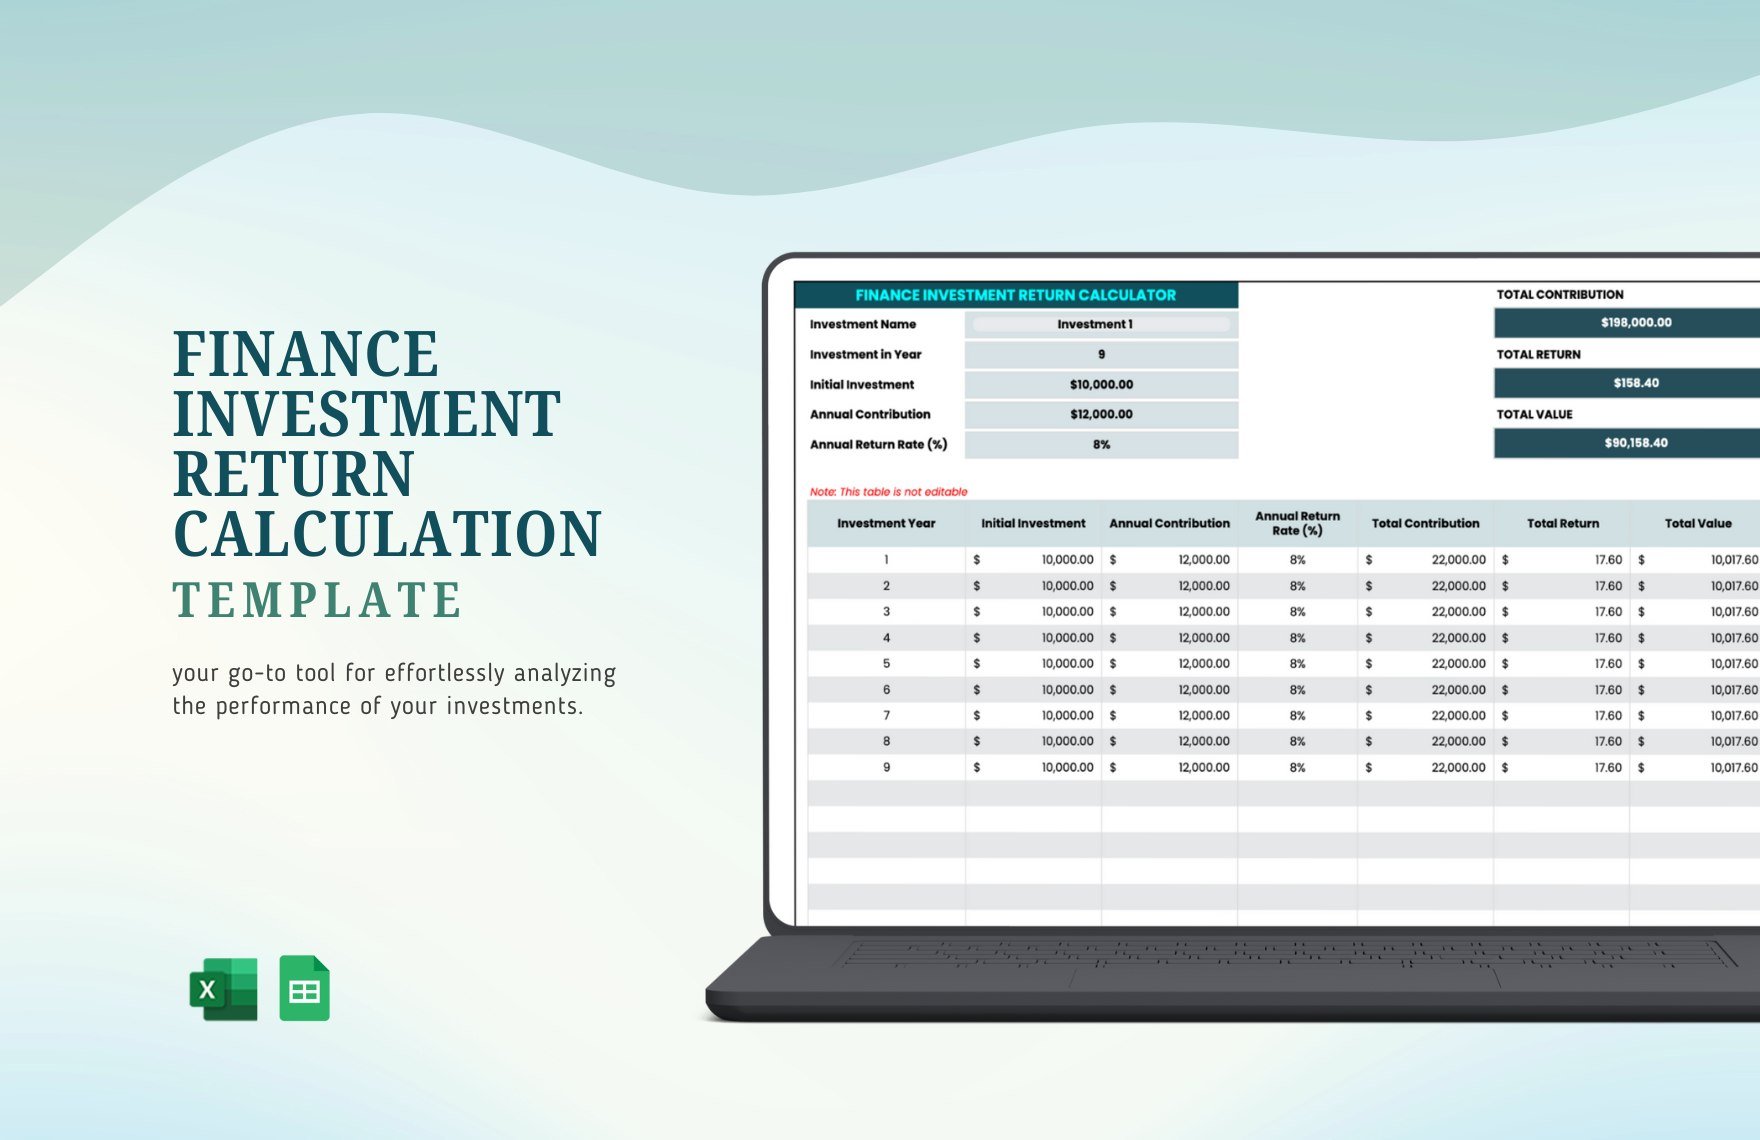 Finance Investment Return Calculation Template